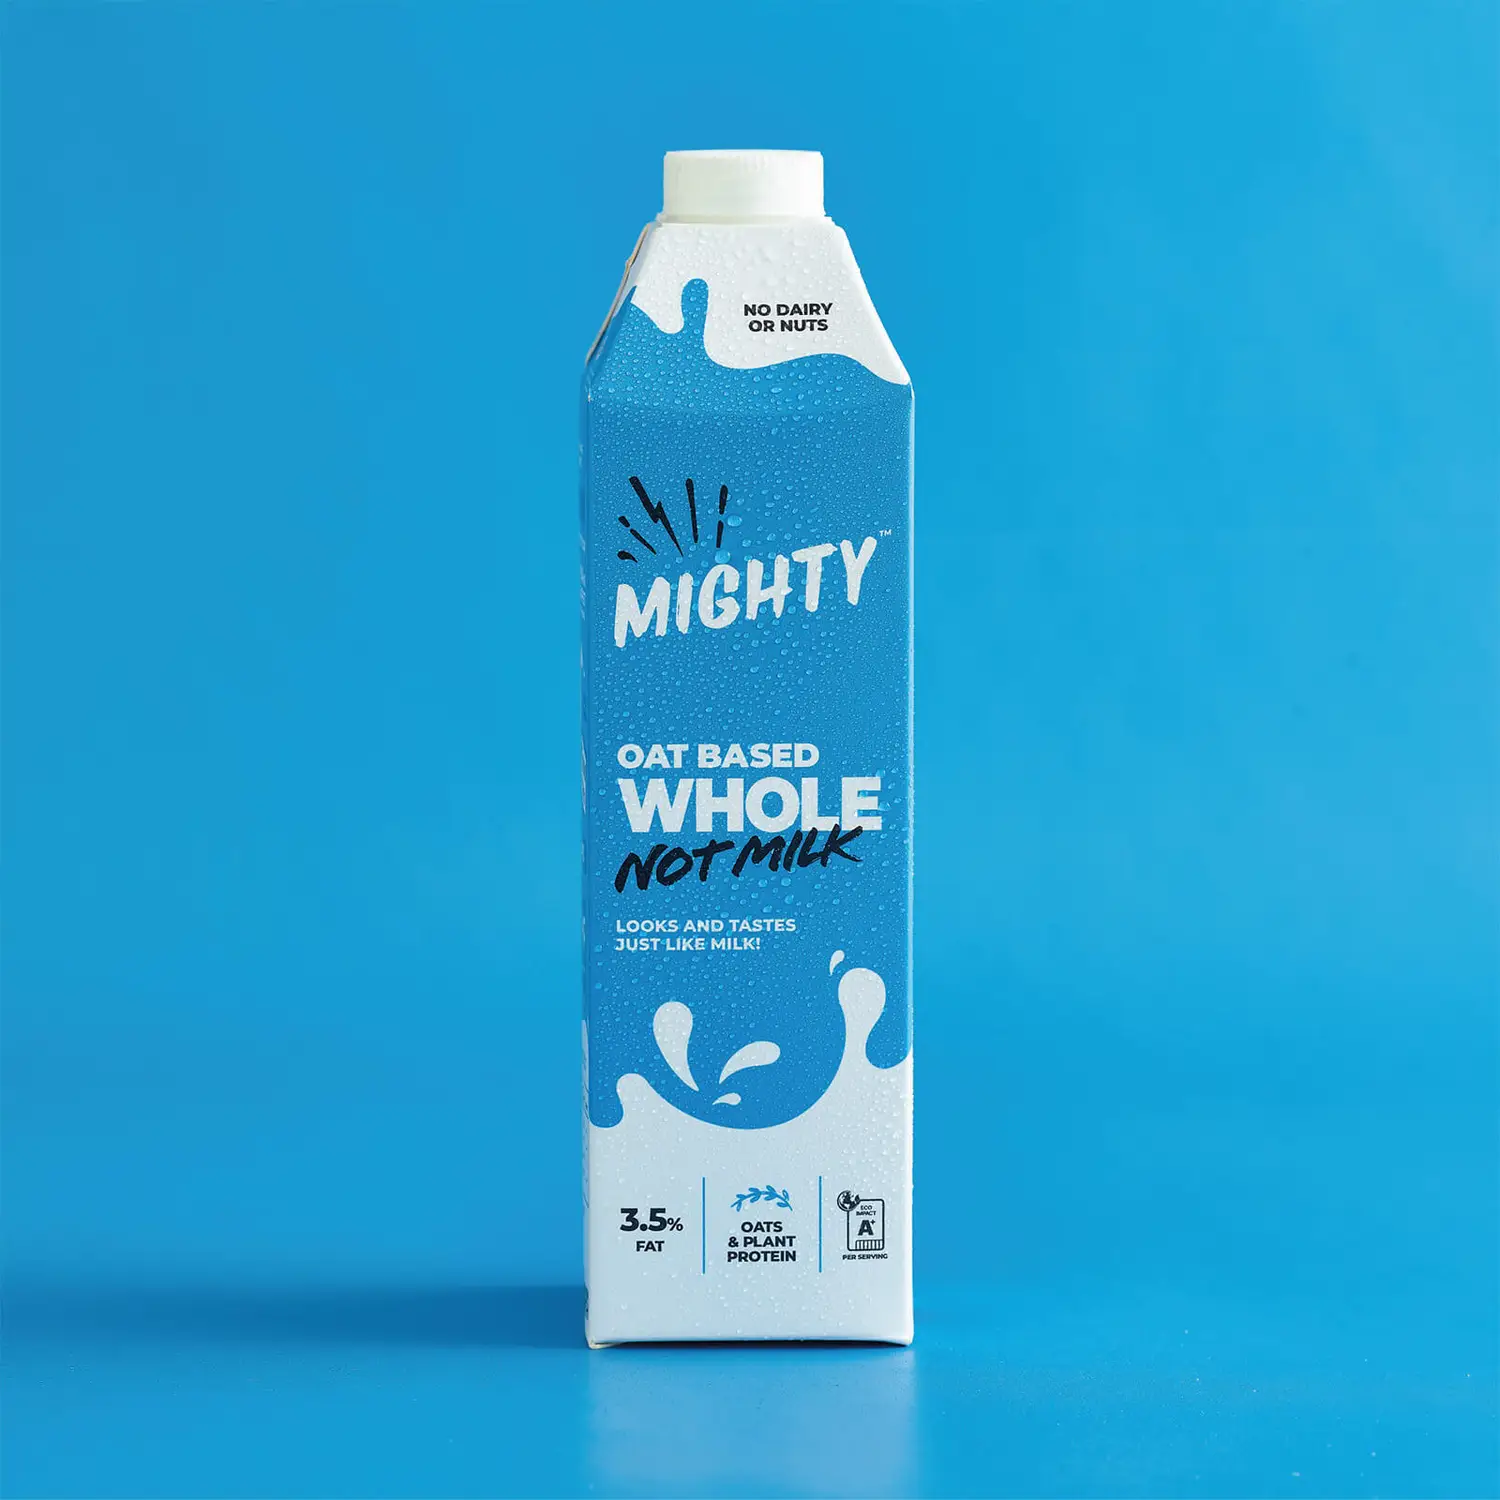 Mighty Oat Based Whole Not Milk